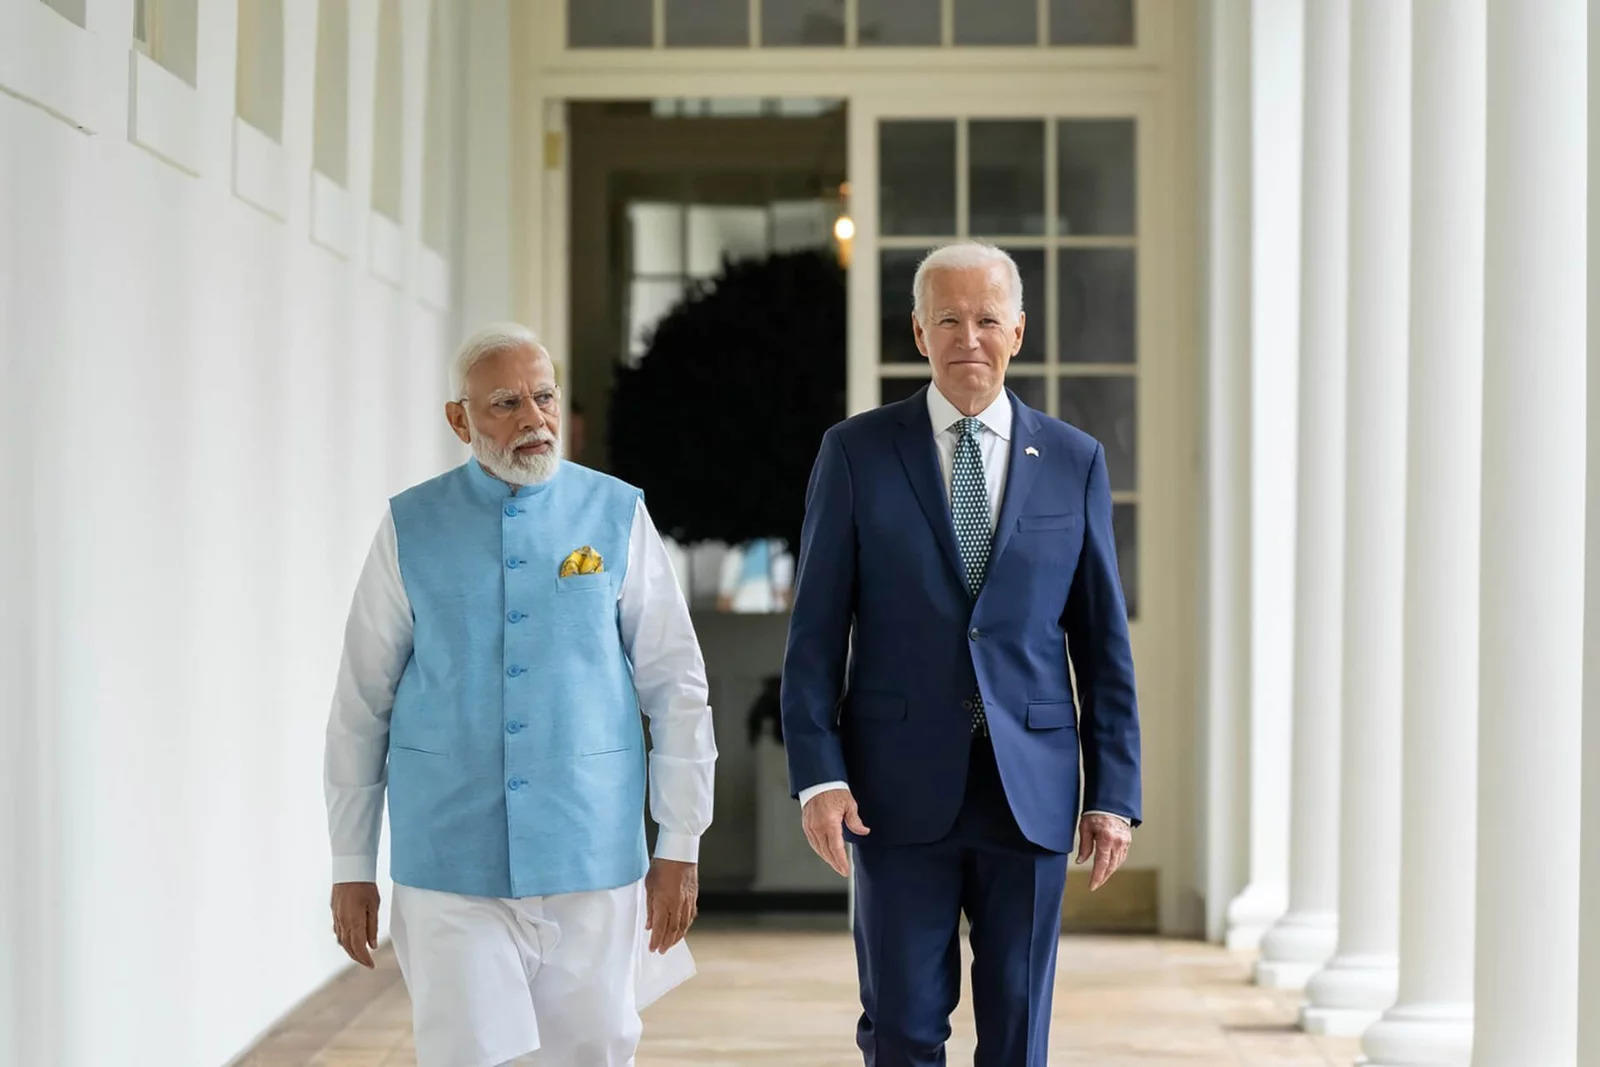 Russian aggression and China aggression strengthen India-US relations, but Delhi's "Ultimate Balancer" strategy may not live up to US expectations.